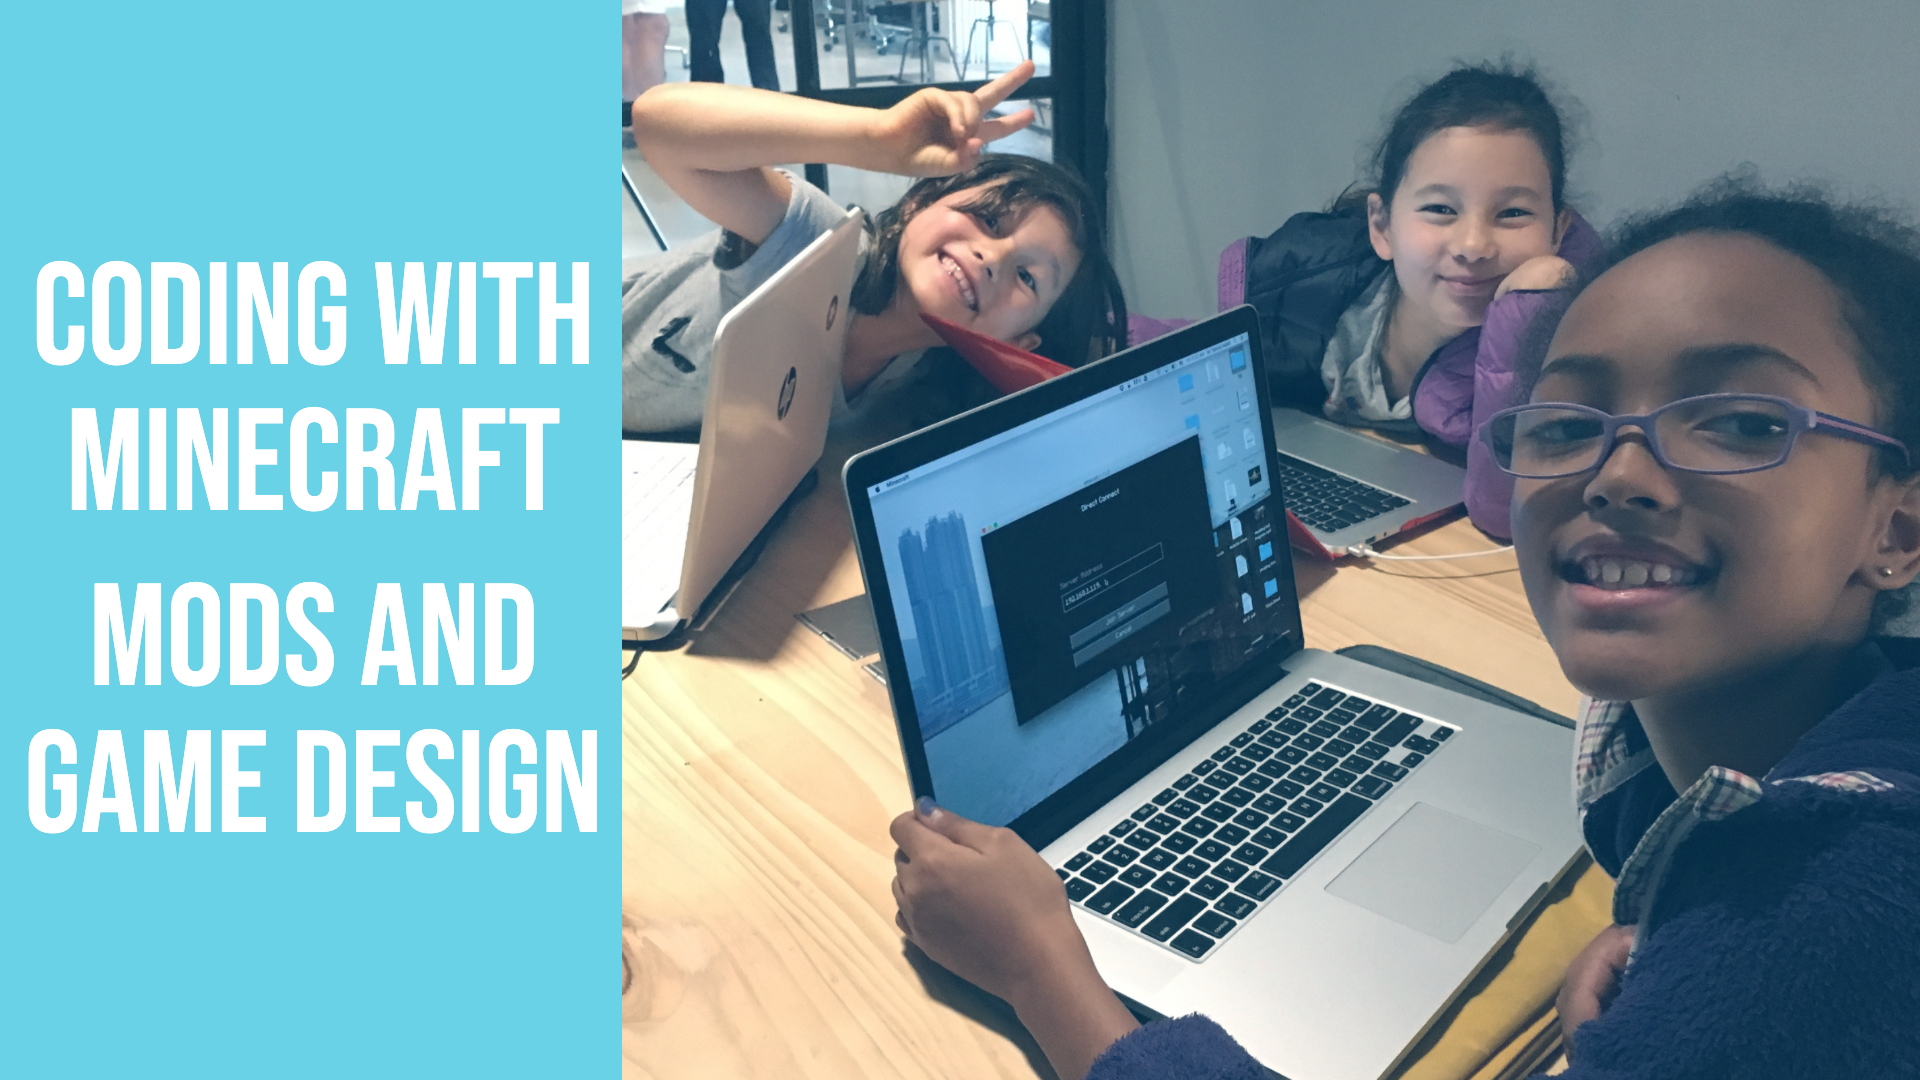 Coding With Minecraft October Holiday Camp 2019 Wan Chai Tiny Code Hong Kong - roblox coding 3d game design october holiday camp 2019